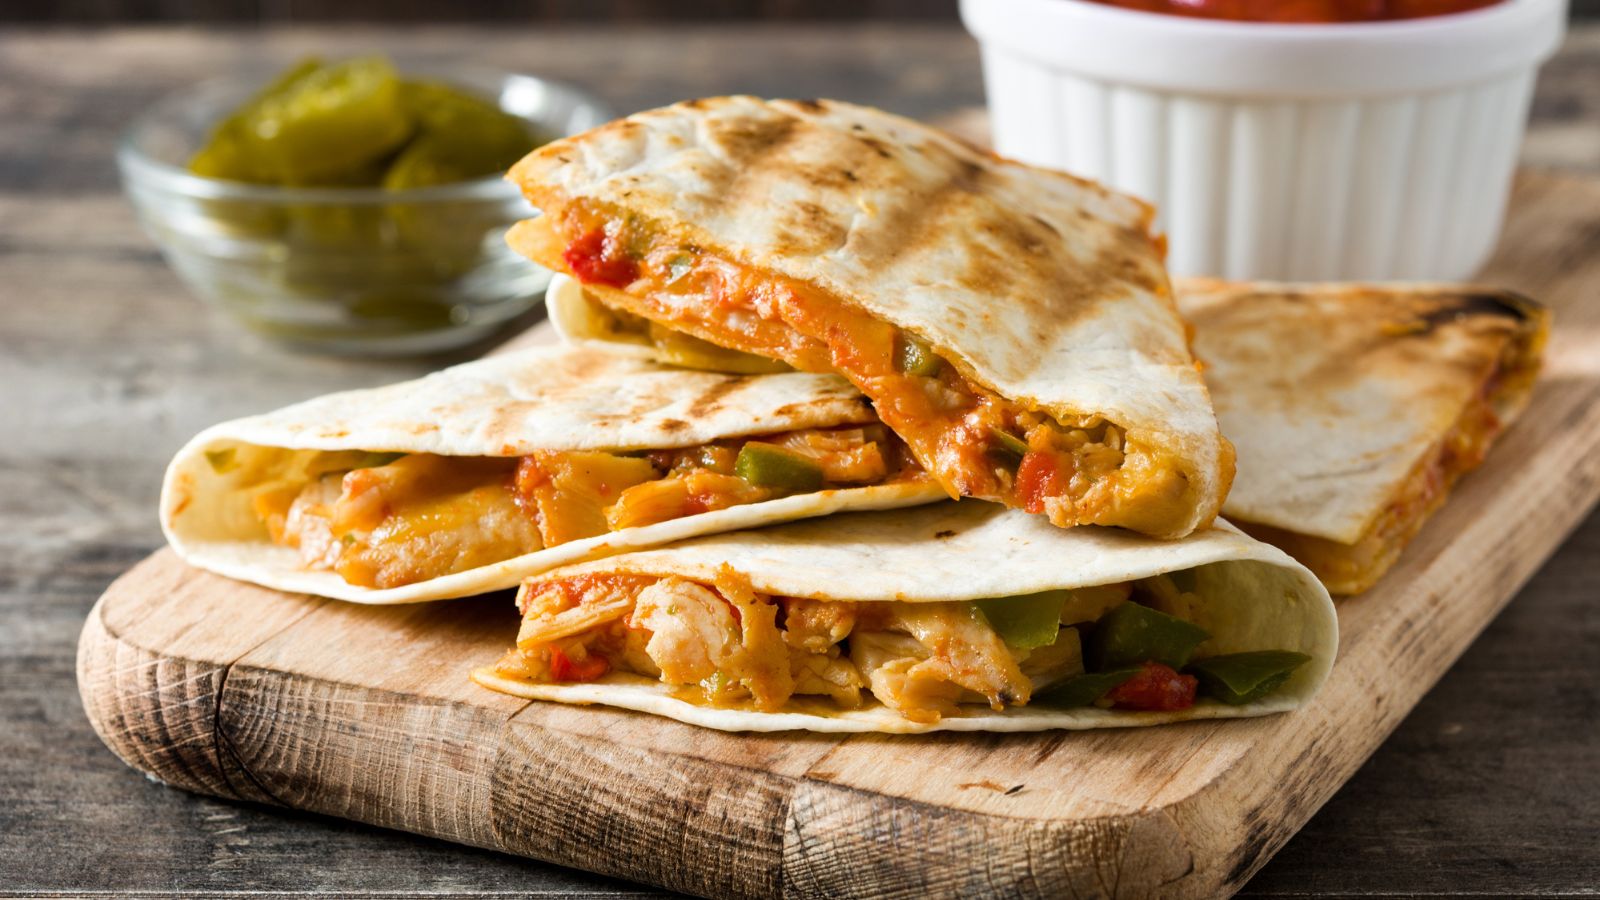 Fuel Your Fat Loss Journey with These 22 Quick and Delicious Lunch Options